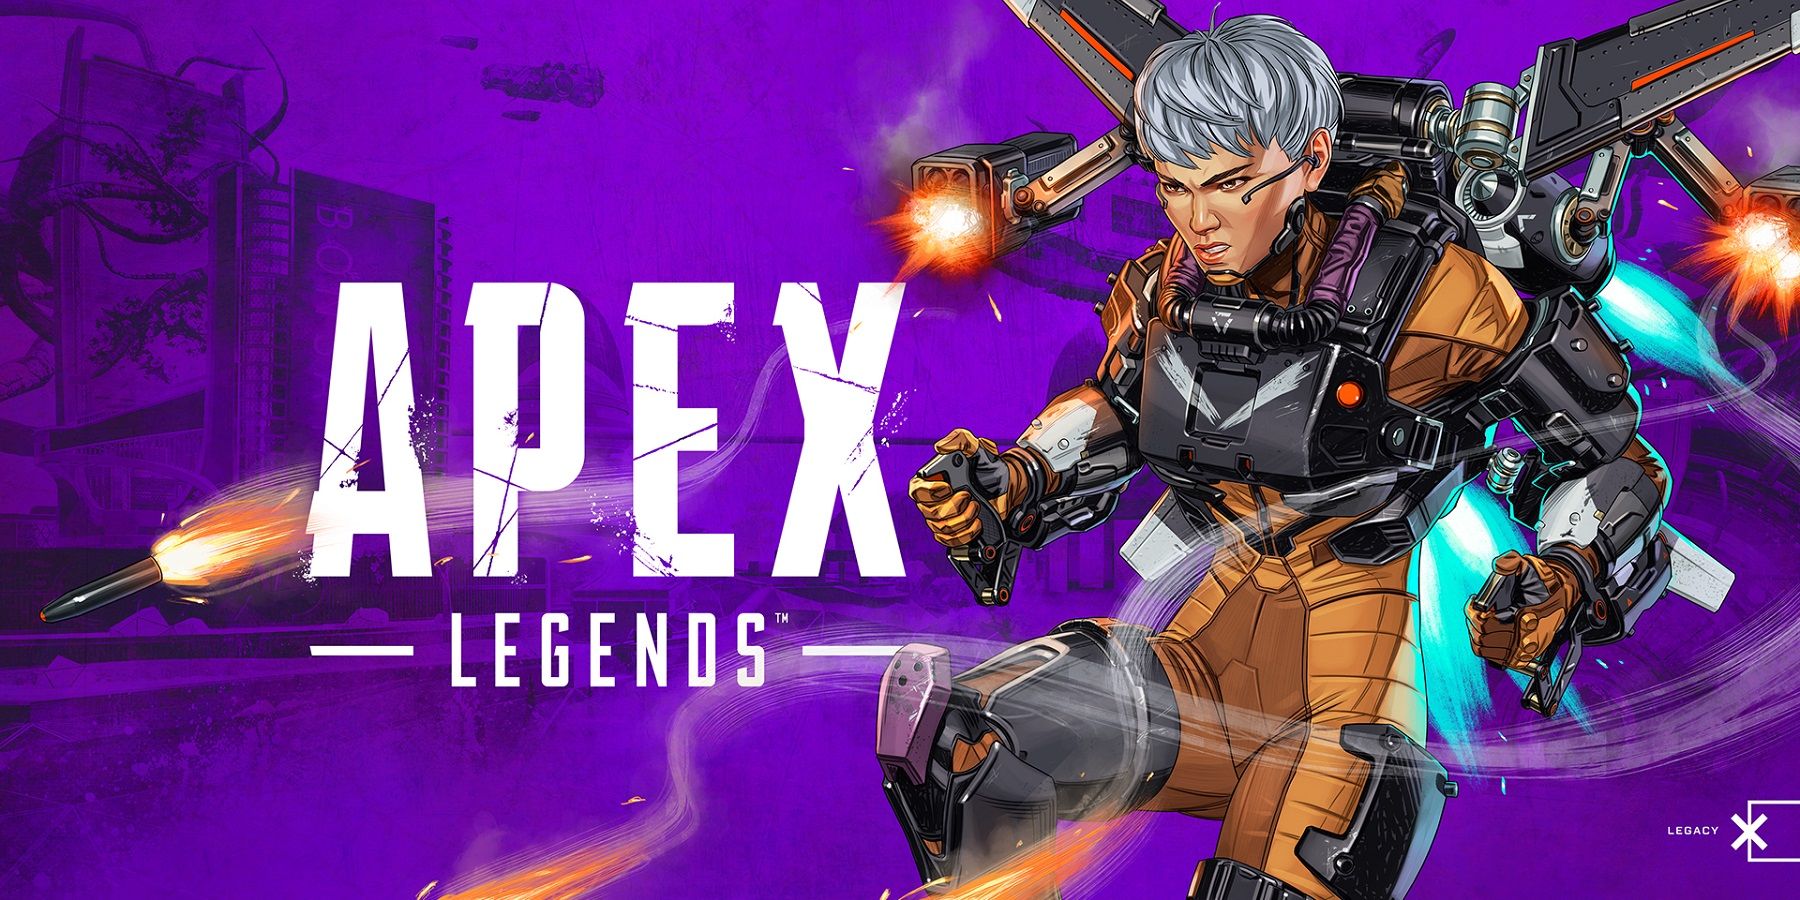 One of Apex Legends' hero characters flying and firing missiles.